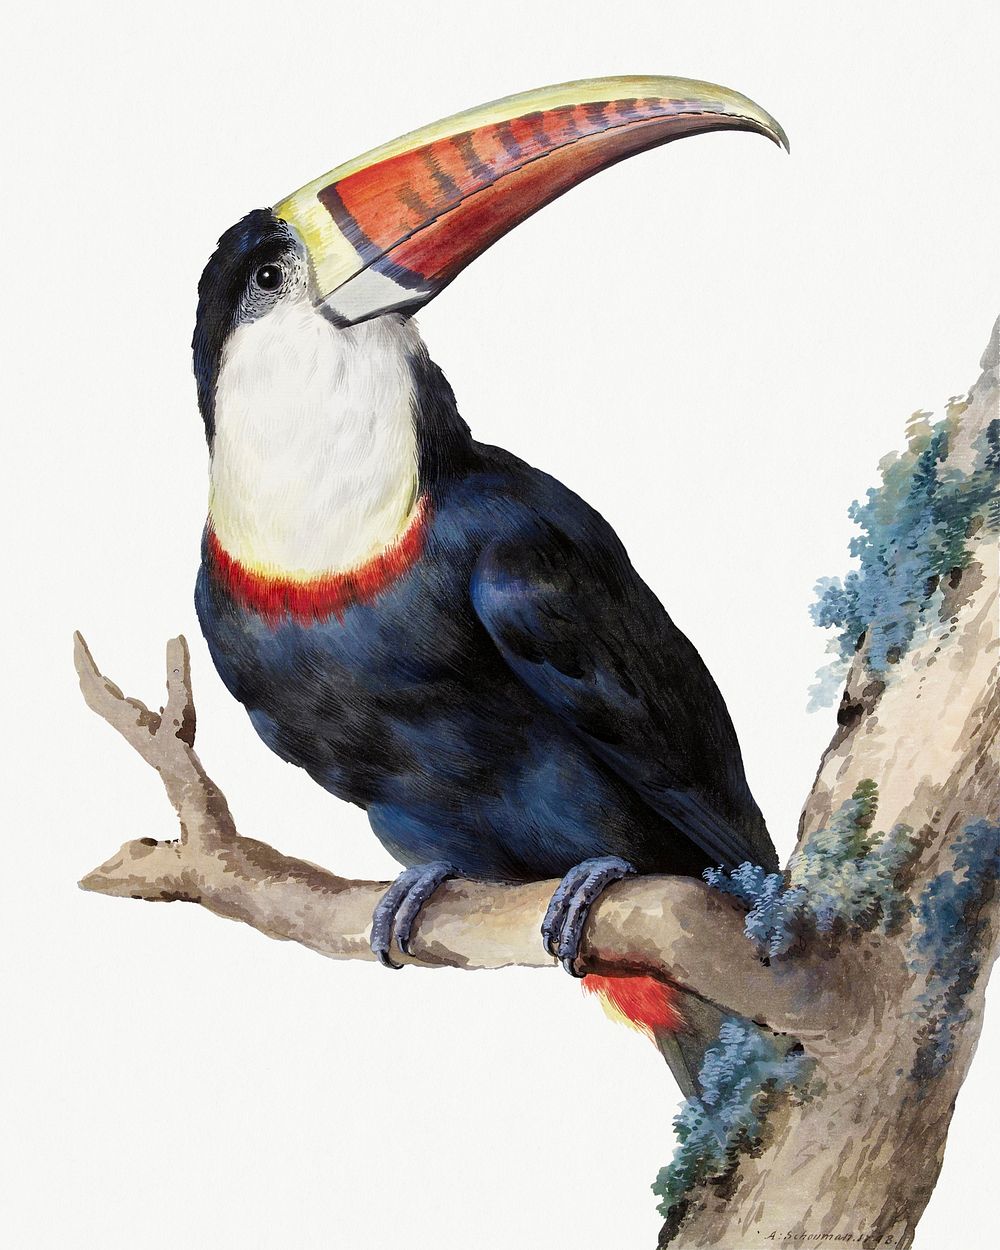 Red billed toucan illustration, remixed from artworks by Aert Schouman